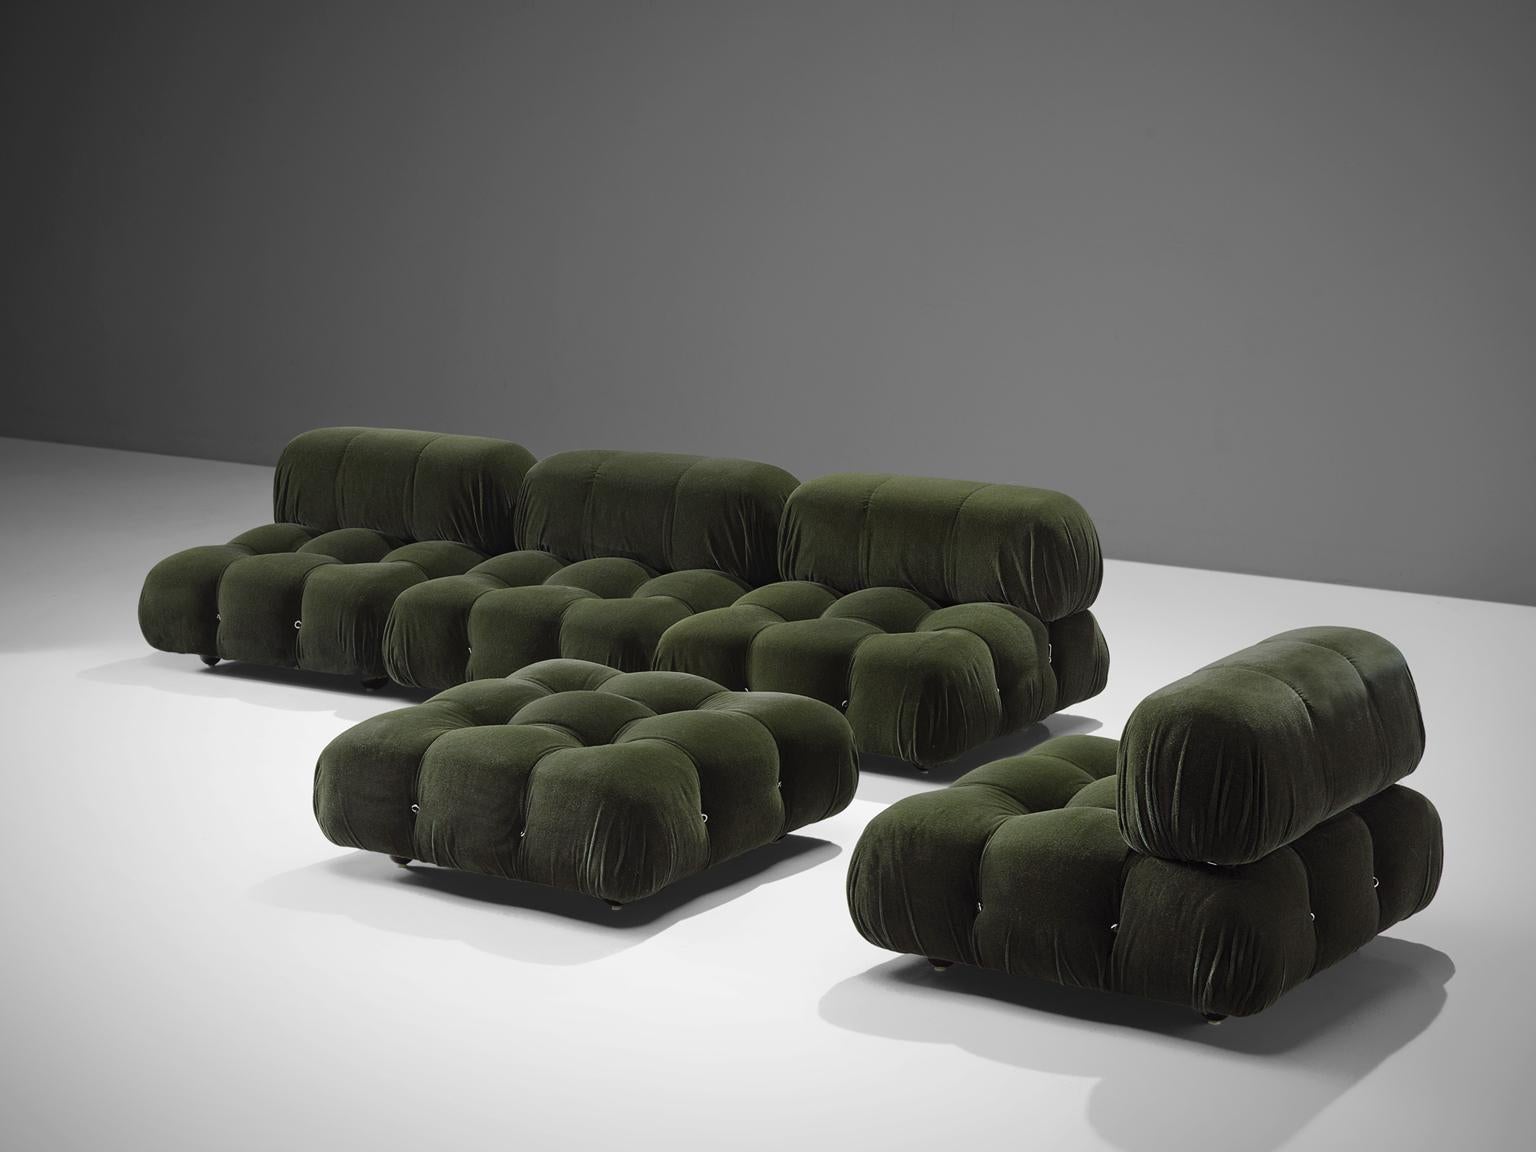 Mario Bellini, large modular 'Cameleonda' sofa in green velvet alpaca wool, Italy 1972.

The sectional elements of this sofa can be used freely and apart from one another. The upholstery on this piece features a blended deep green wool. The backs